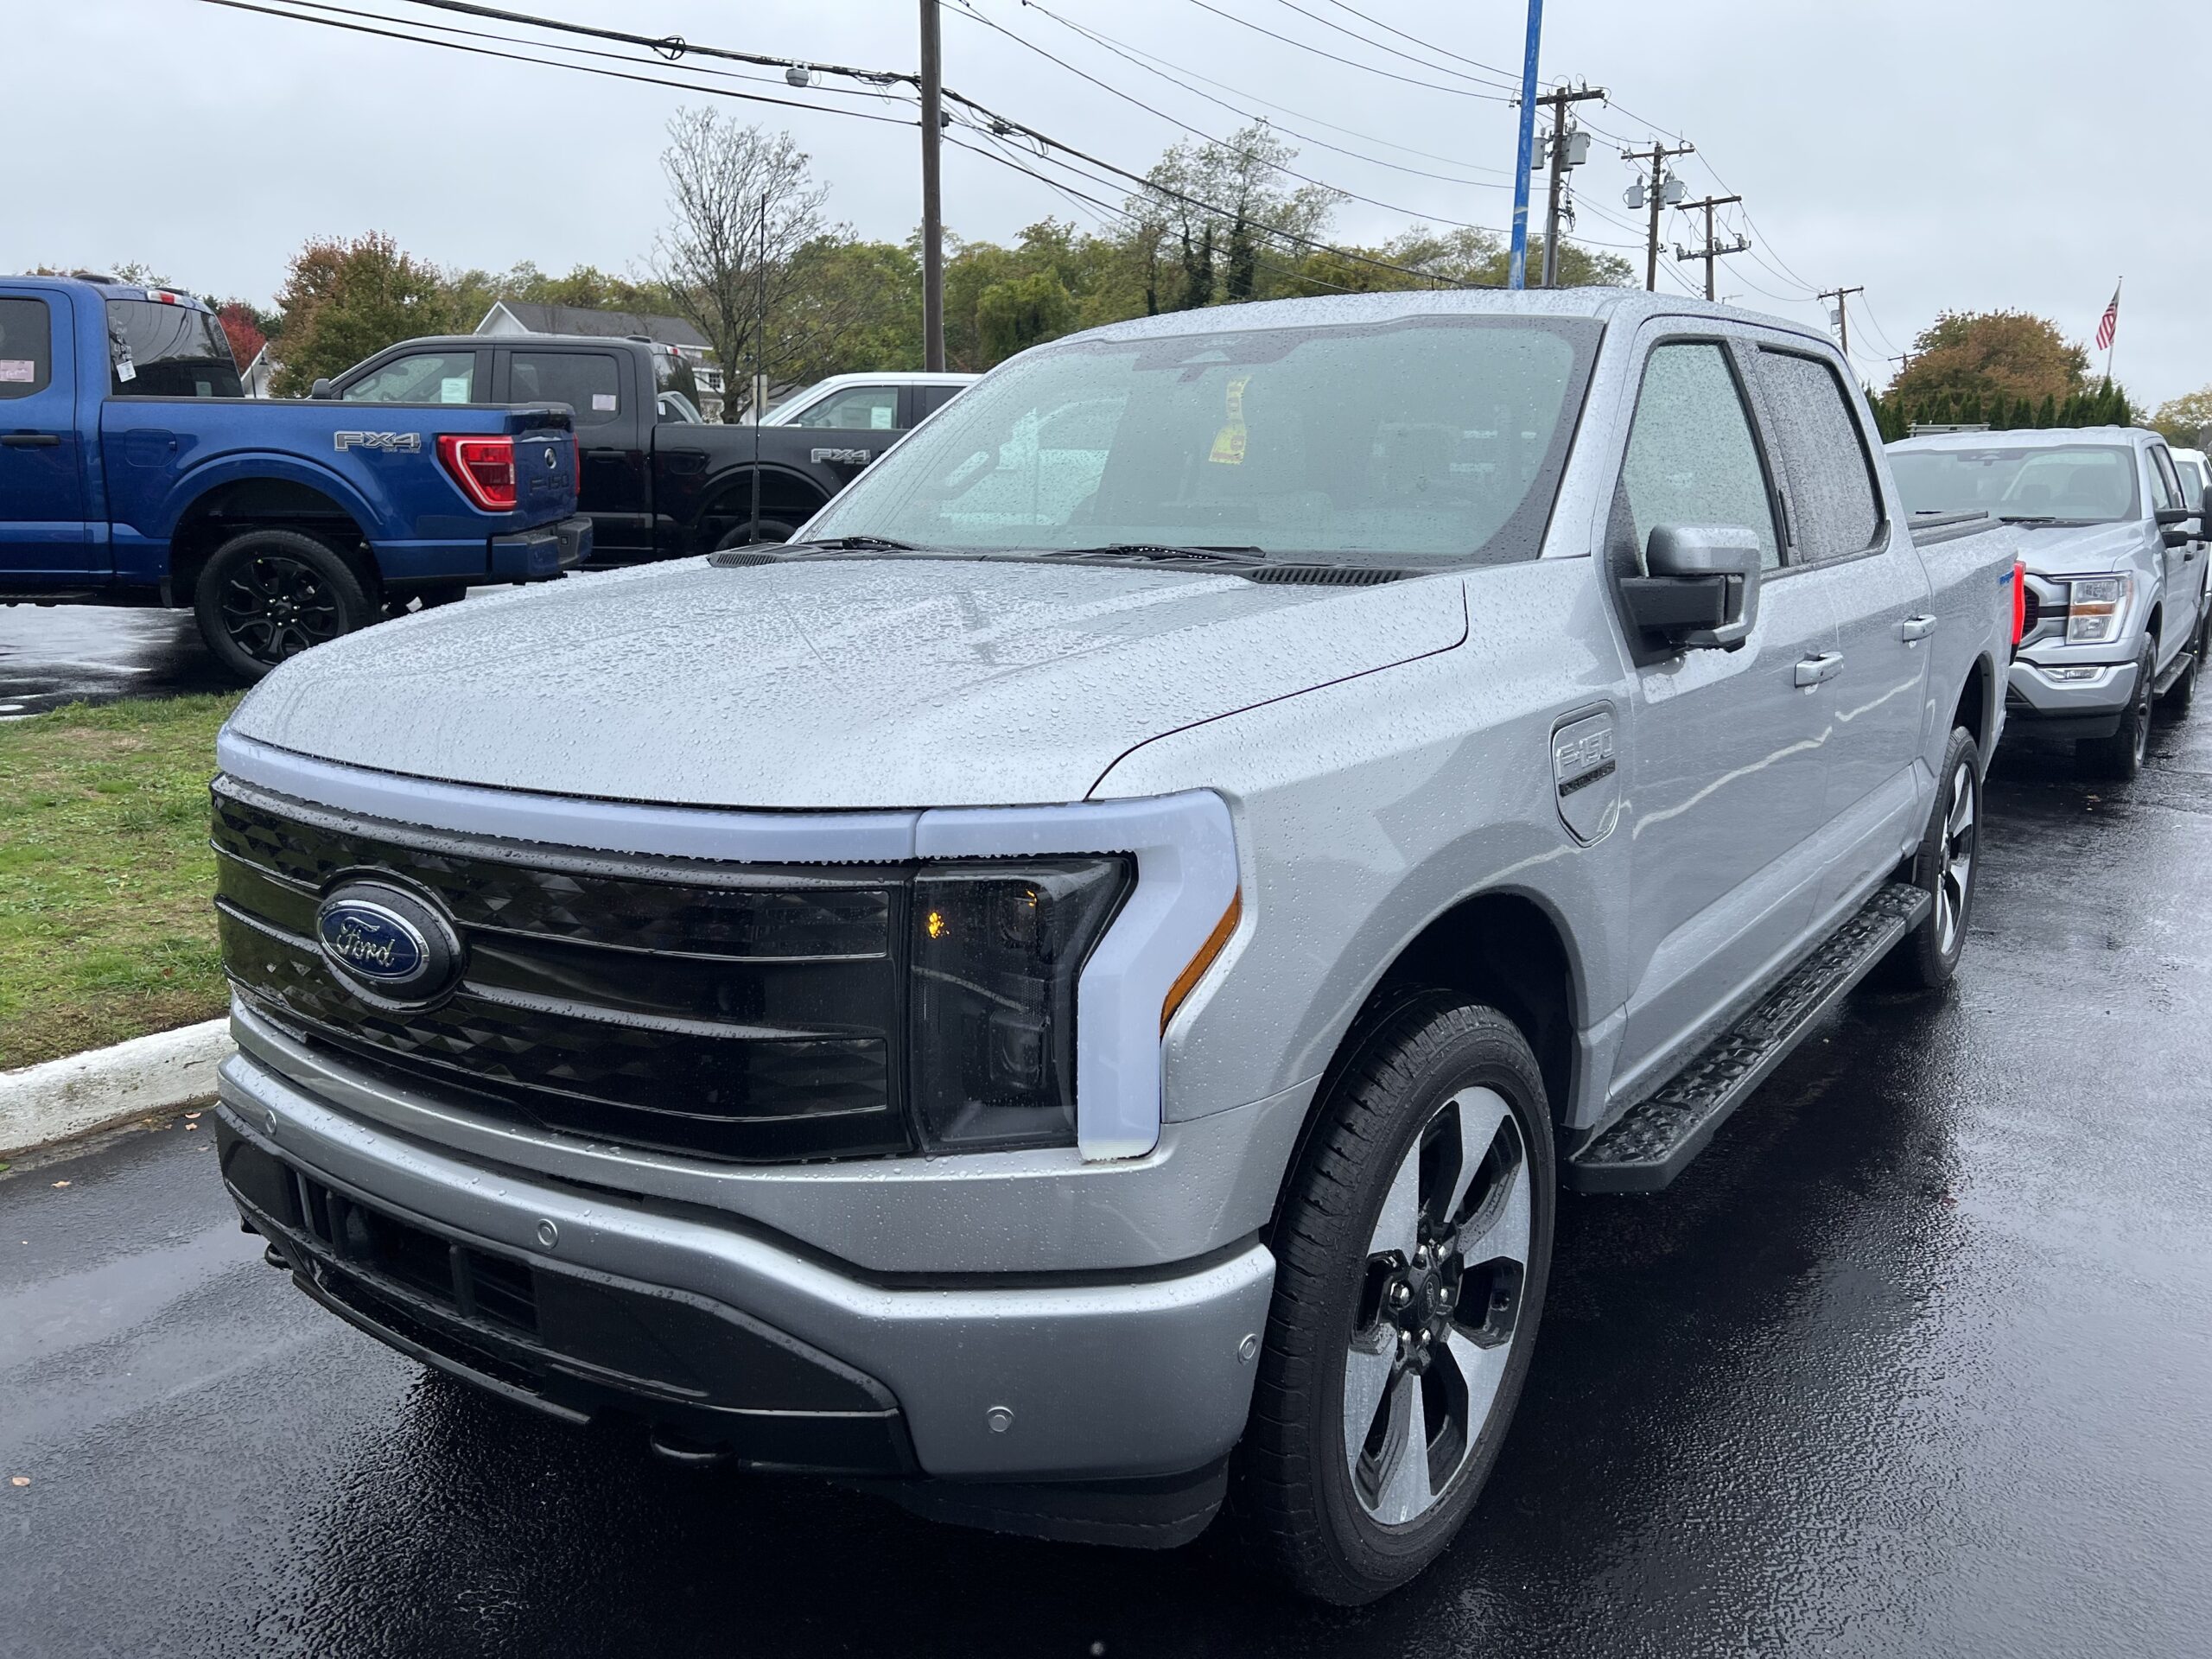 A Ford F-150 Lightning at Storms Ford in Southampton. DANA SHAW